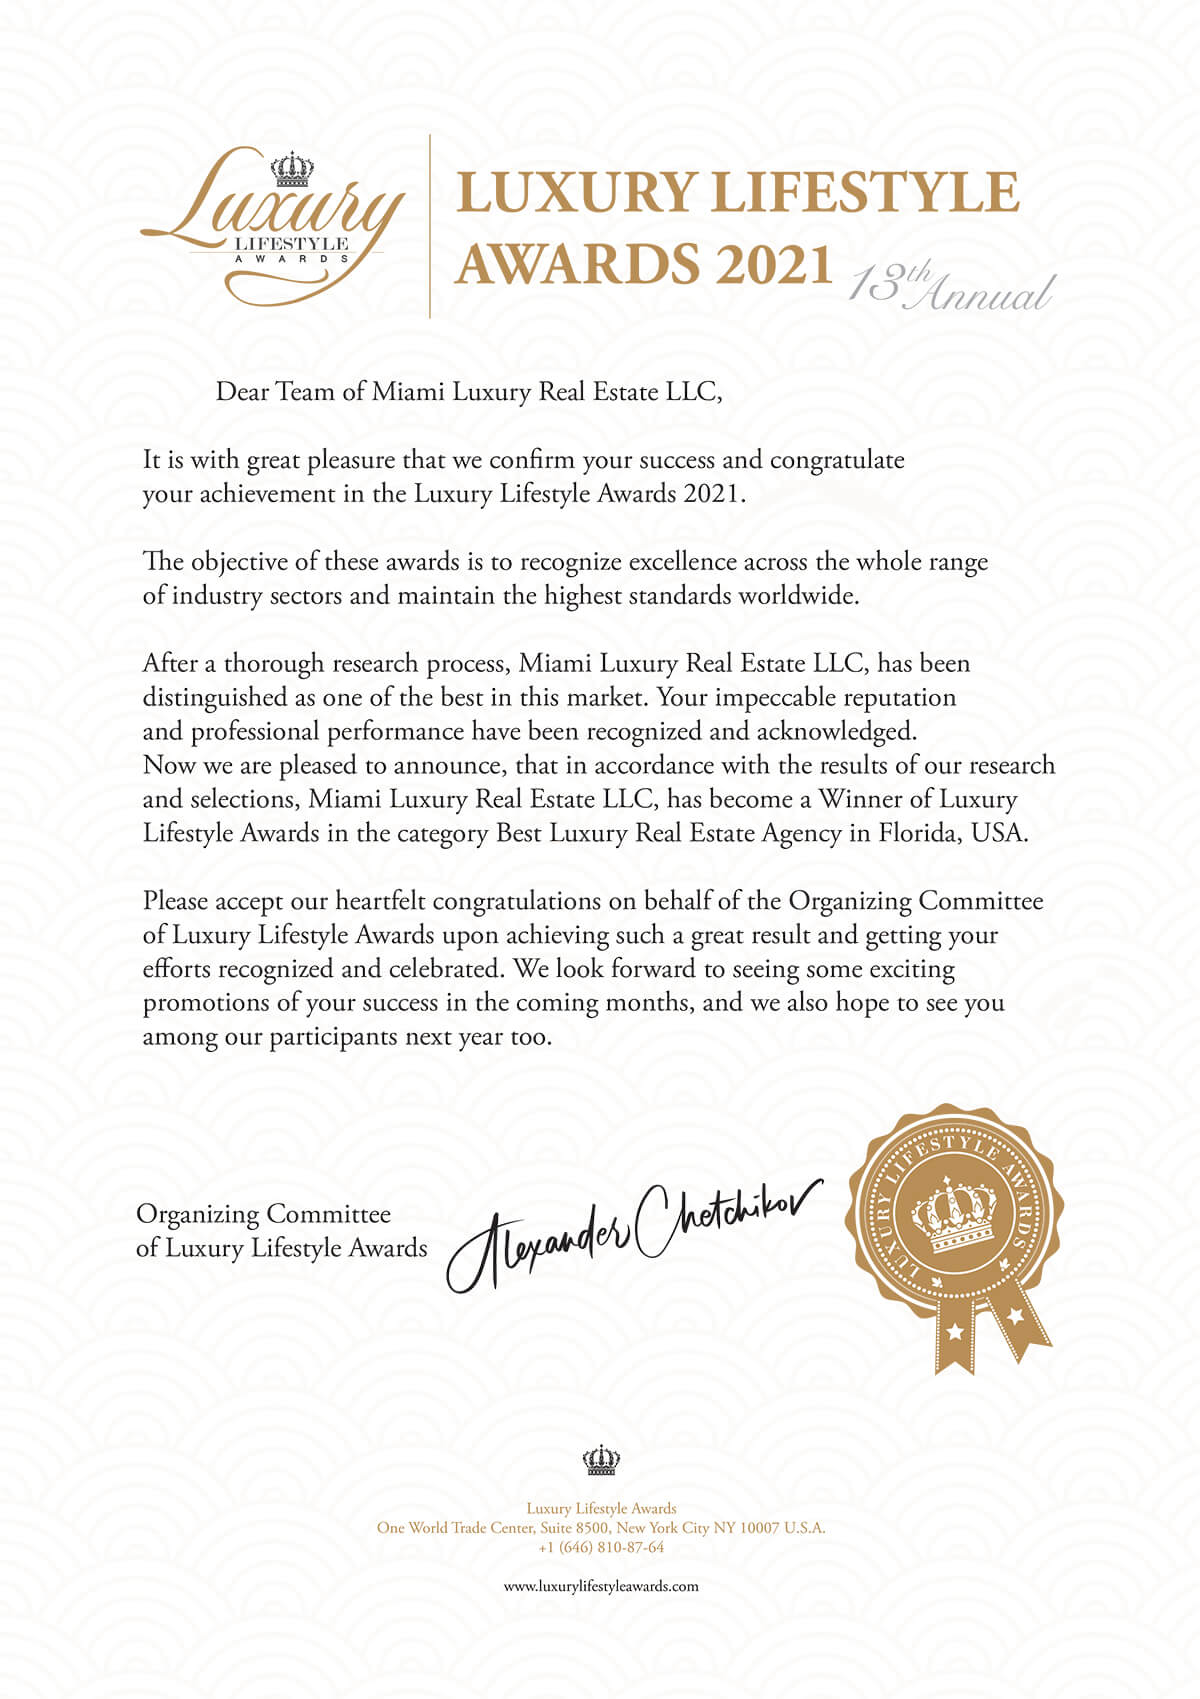 Achievement in the Luxury Lifestyle Awards 2021